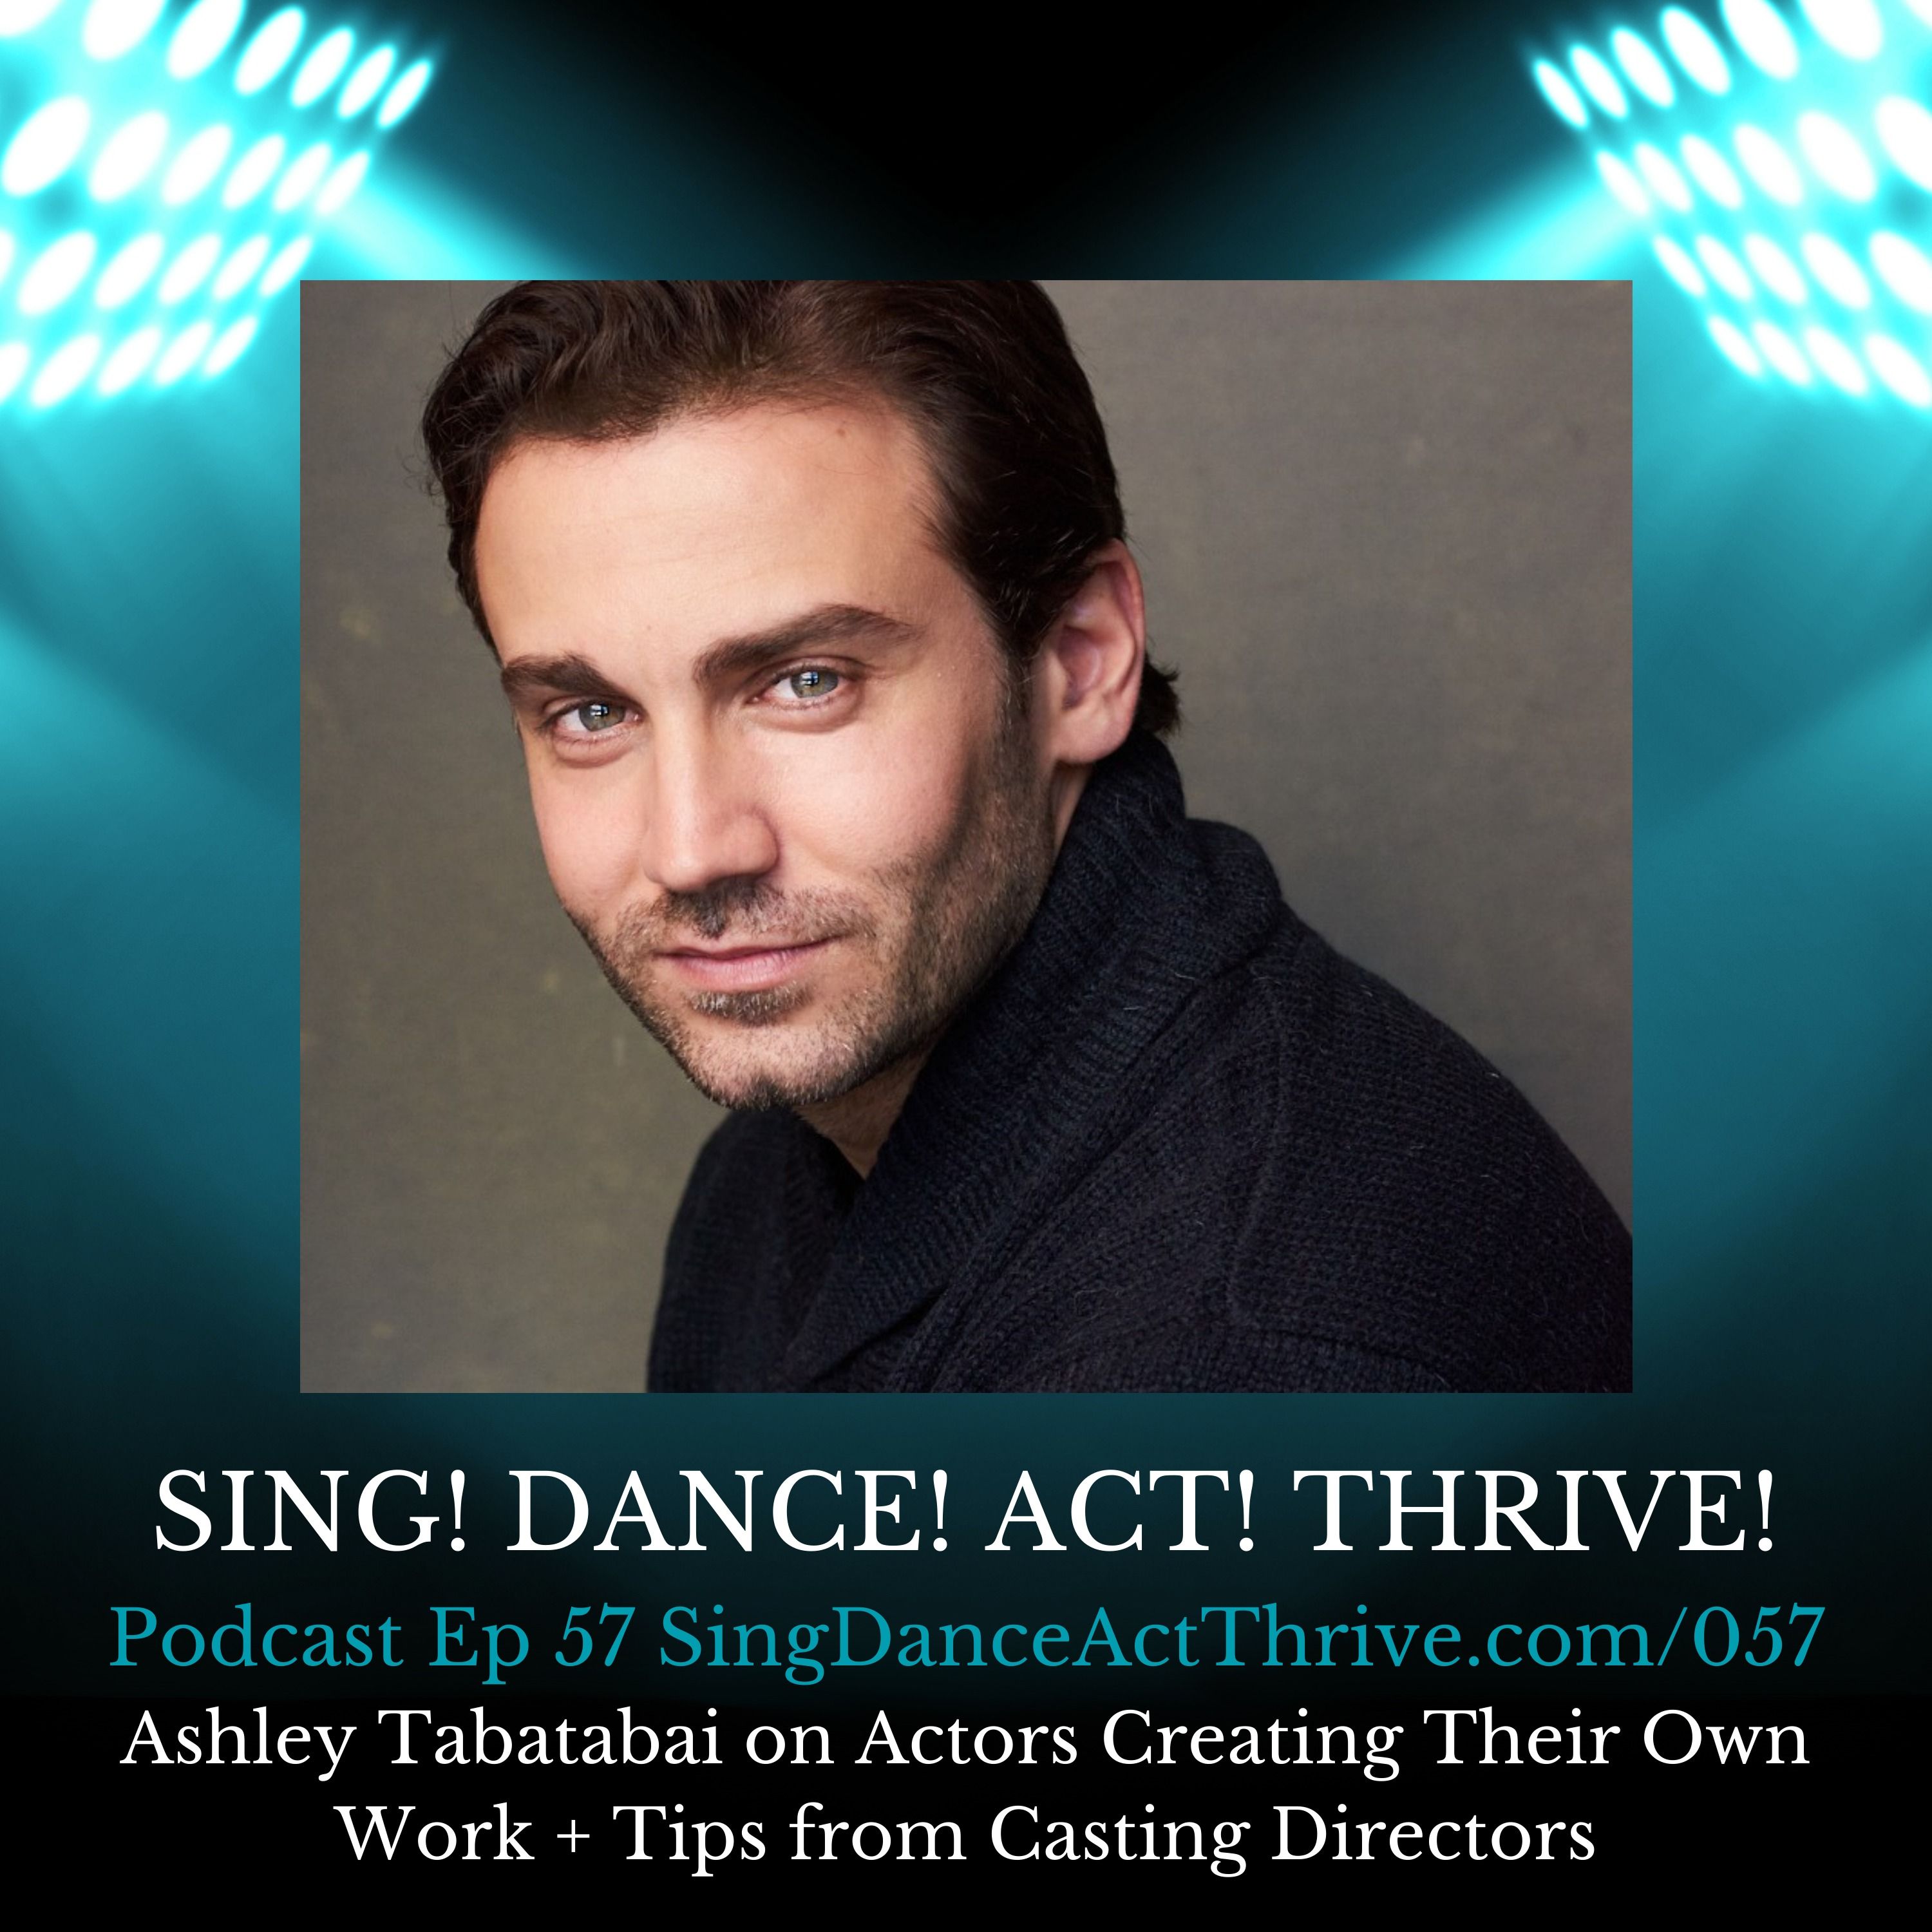 Ashley Tabatabai on Actors Creating Their Own Work + Tips from Casting Directors hero artwork